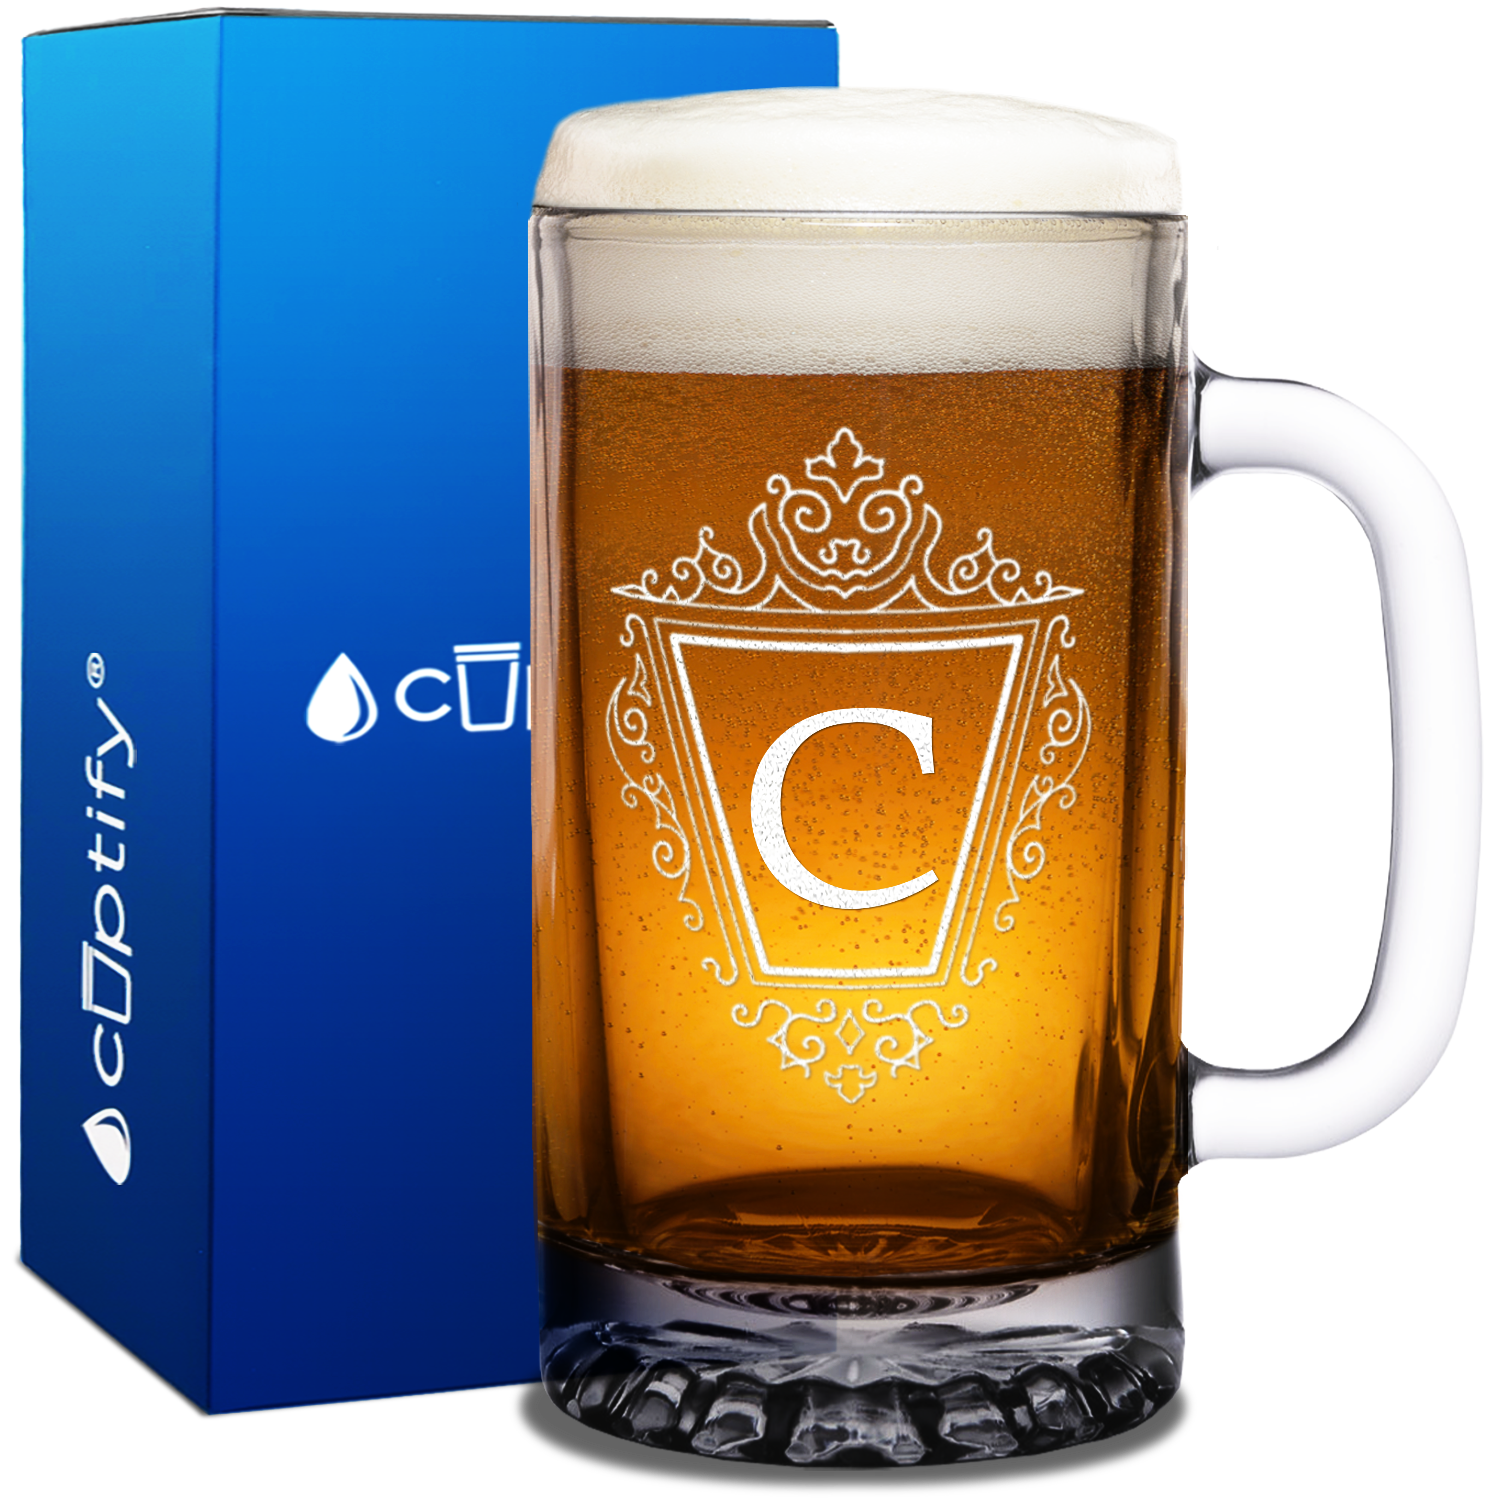 Personalized Classic Crest Etched on 16 oz Glass Mug